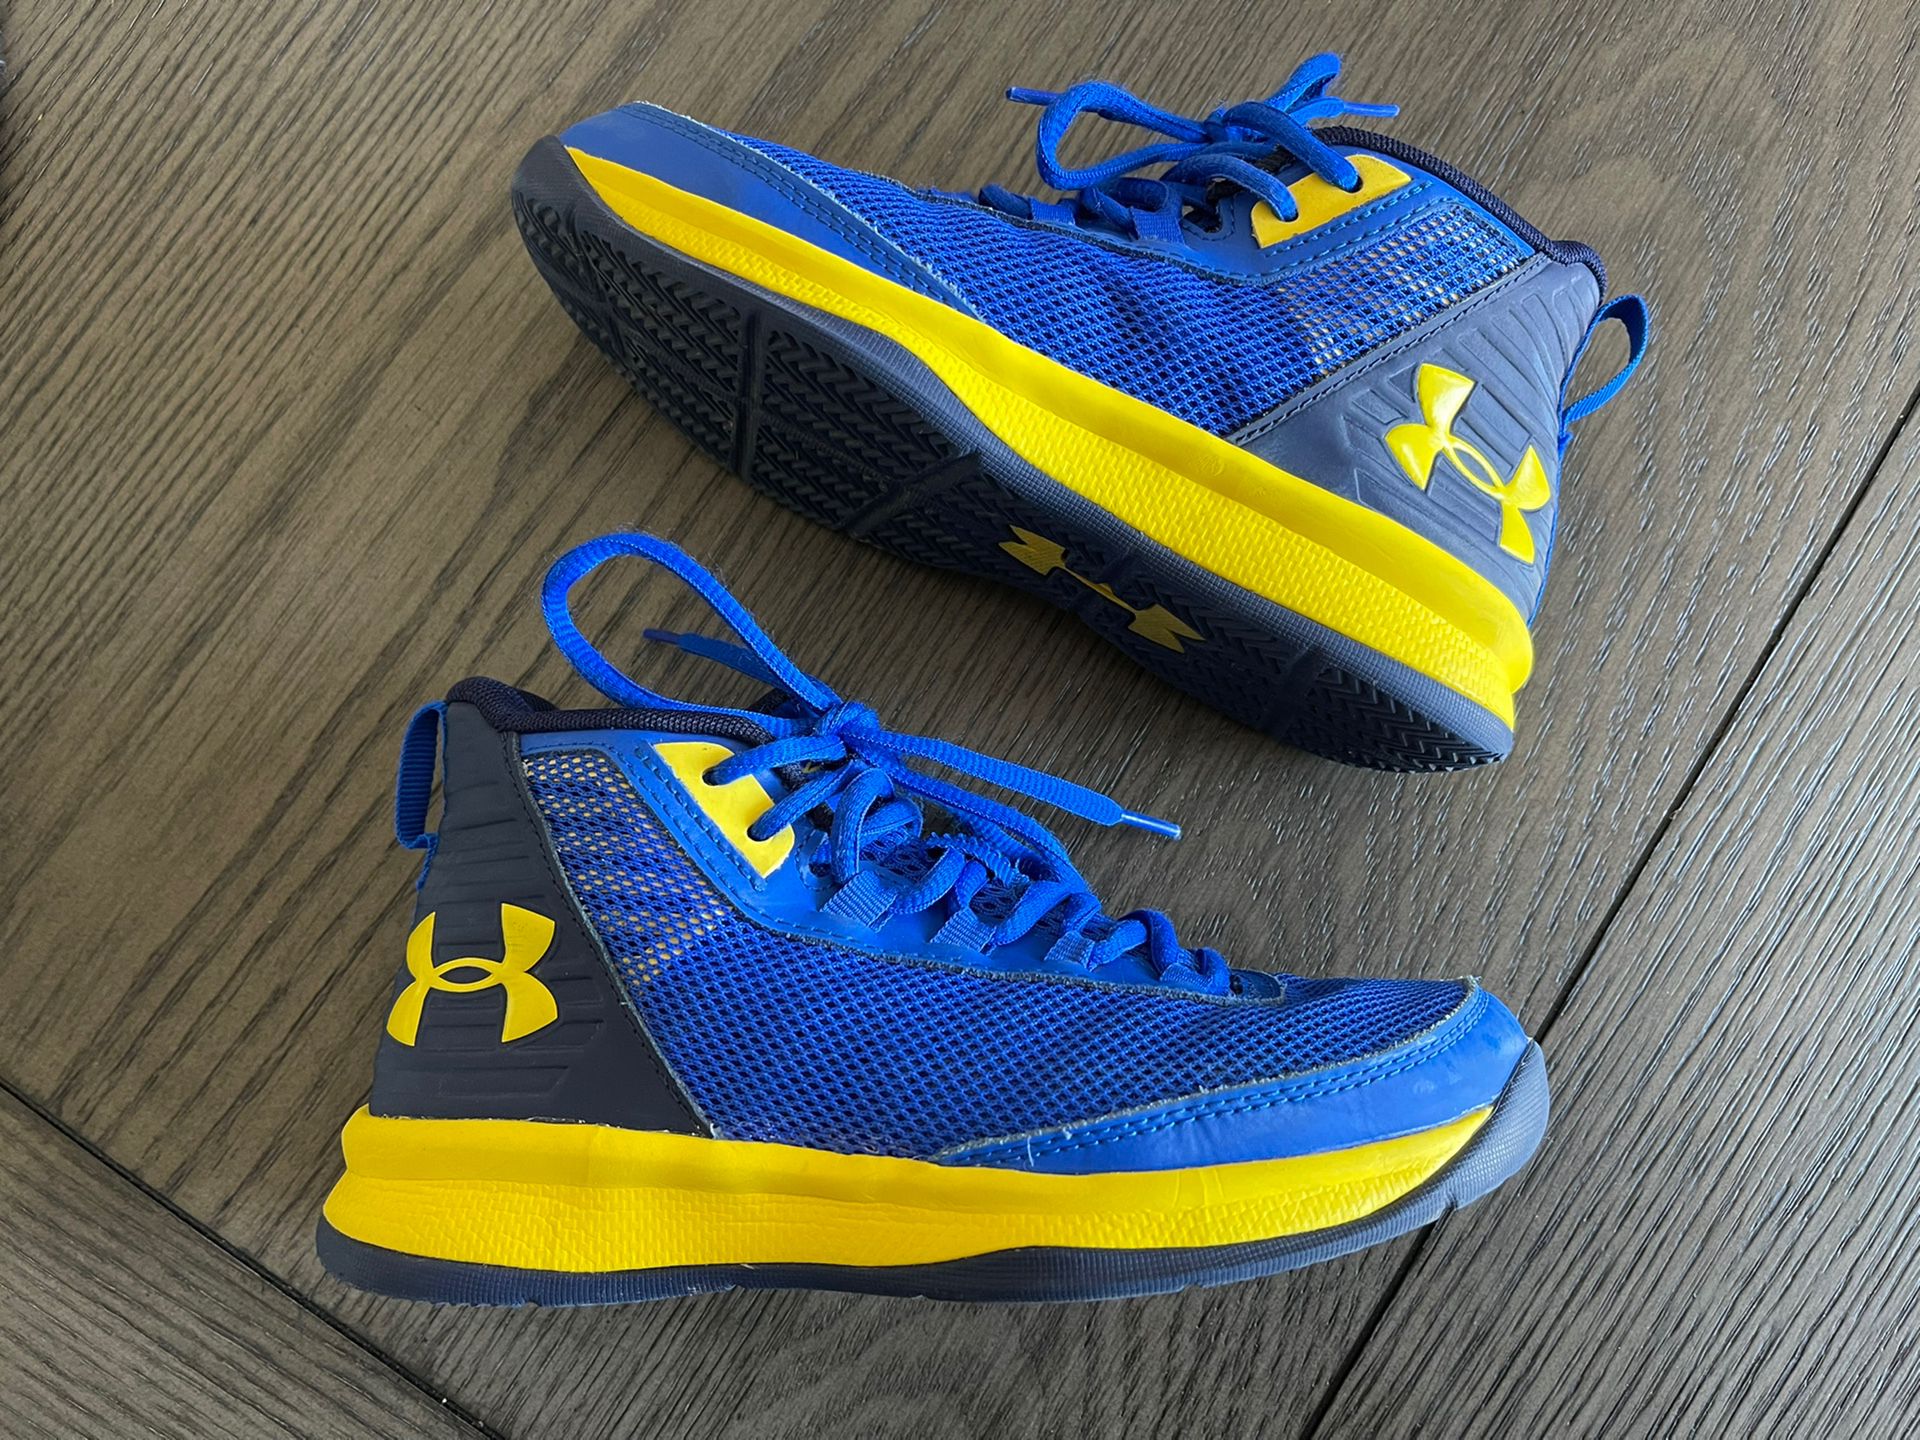 Under Armour Kids Basketball Shoes - Size 2Y.  Great Shoes And Deal.